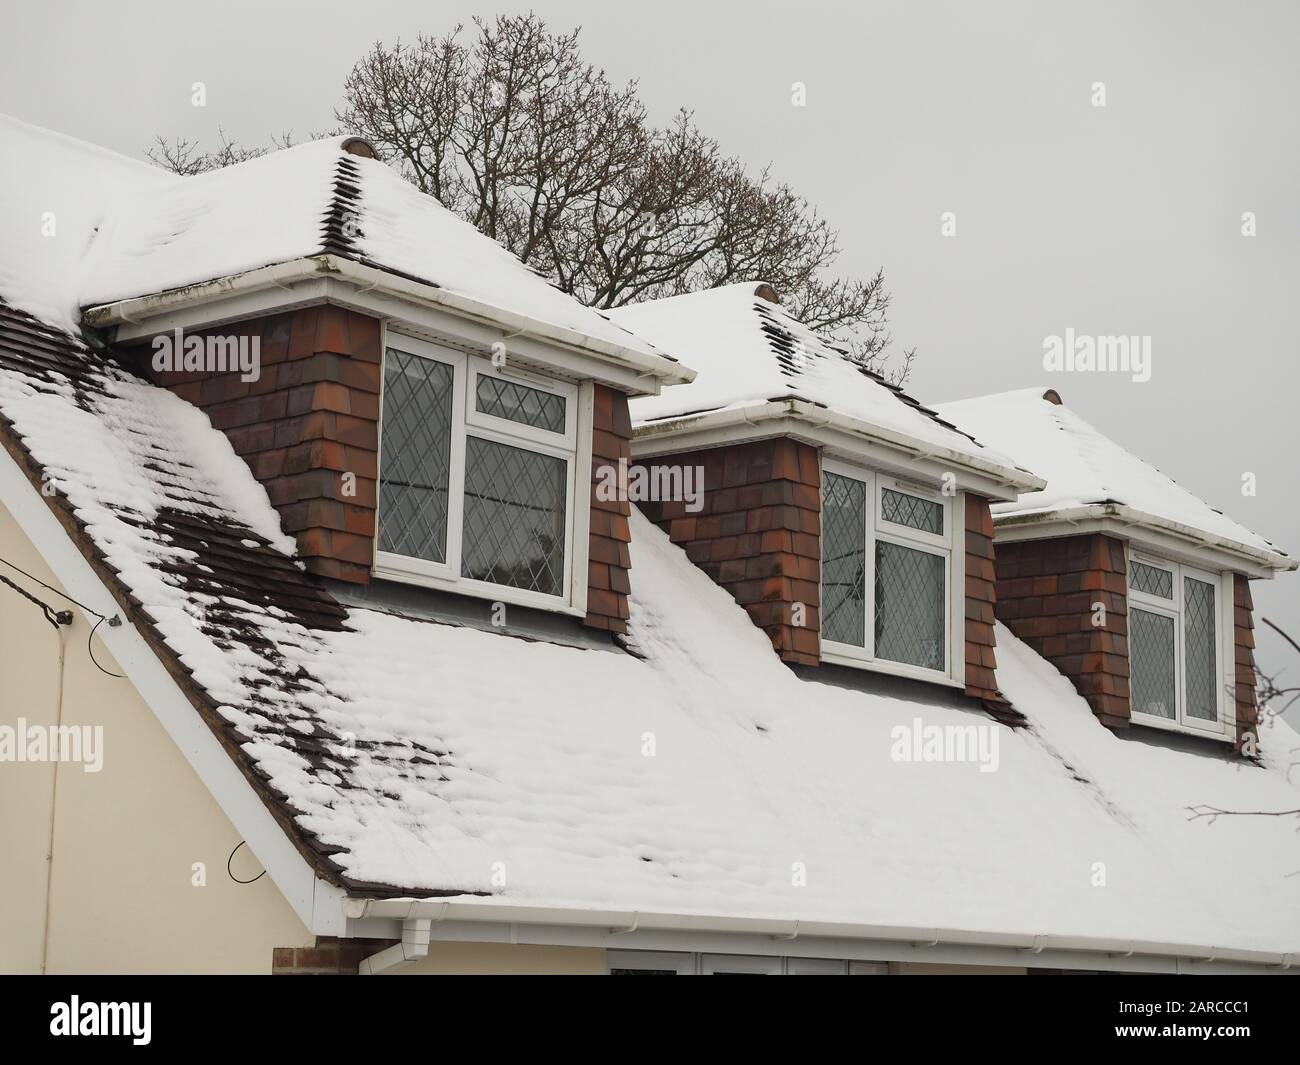 a dormer roof with three rooms in it under a covering of snow Stock Photo